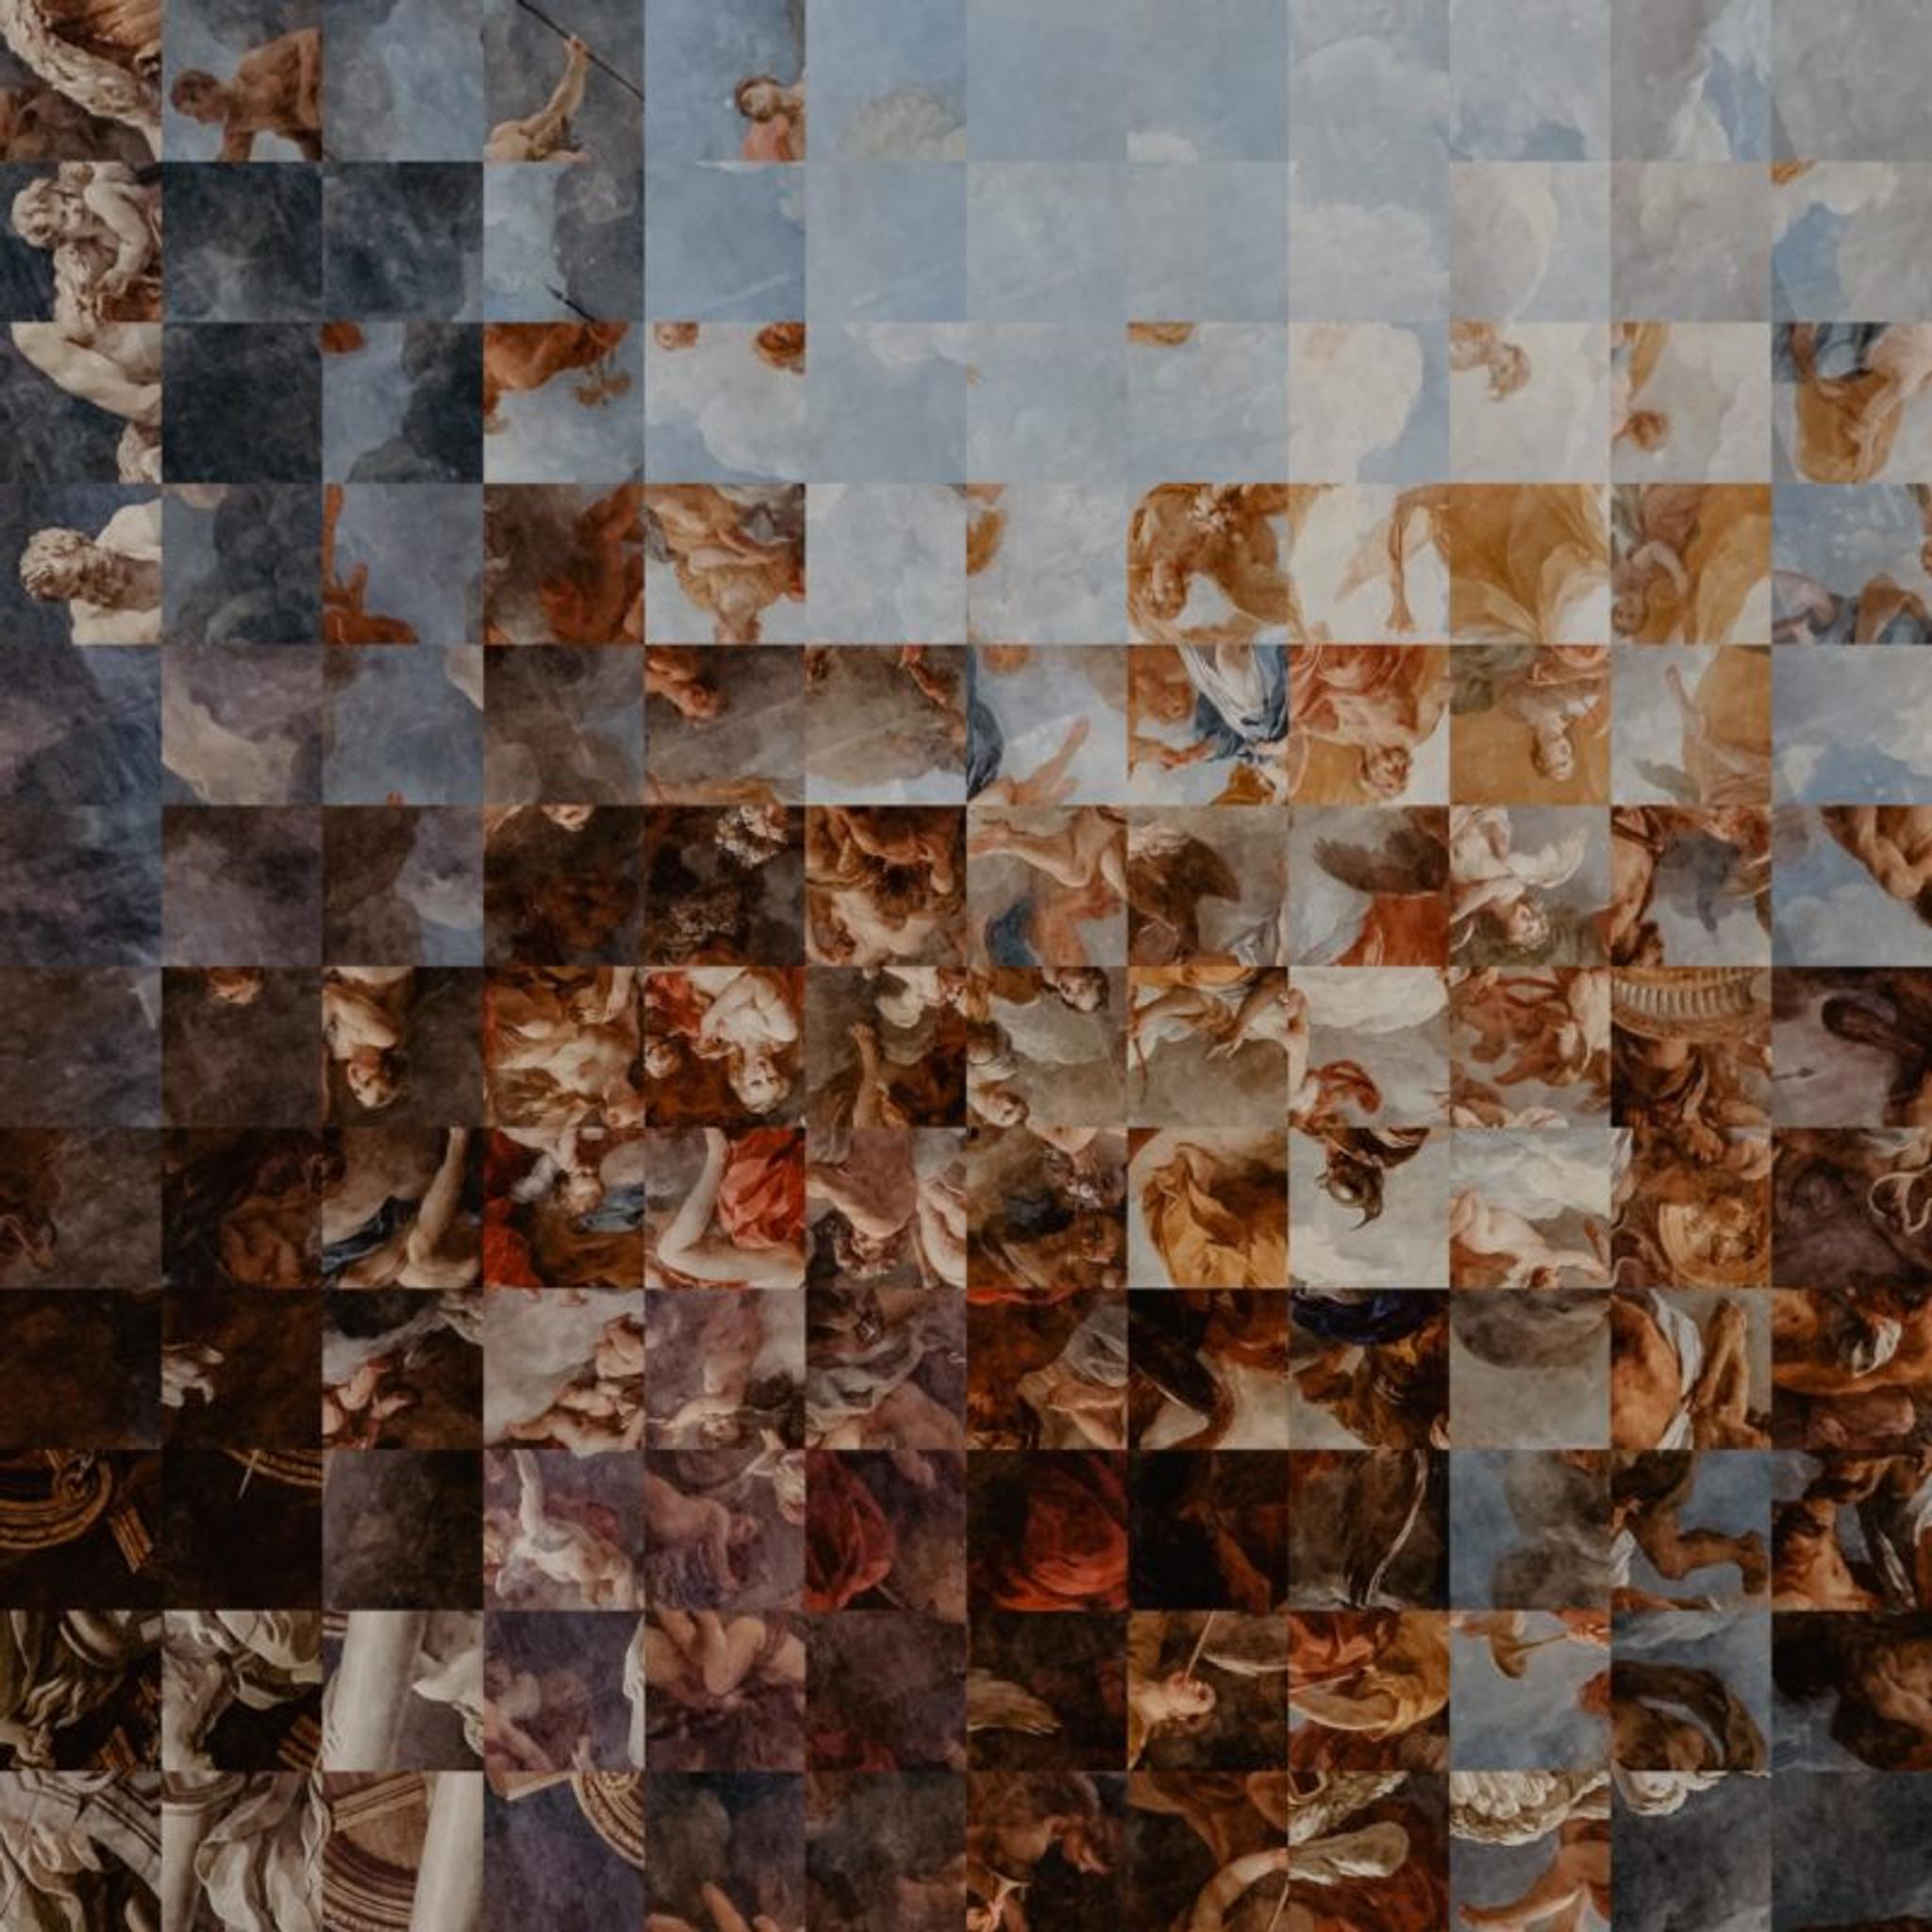 An NFT of a celestial renaissance painting redistributed randomly across checkered squares.